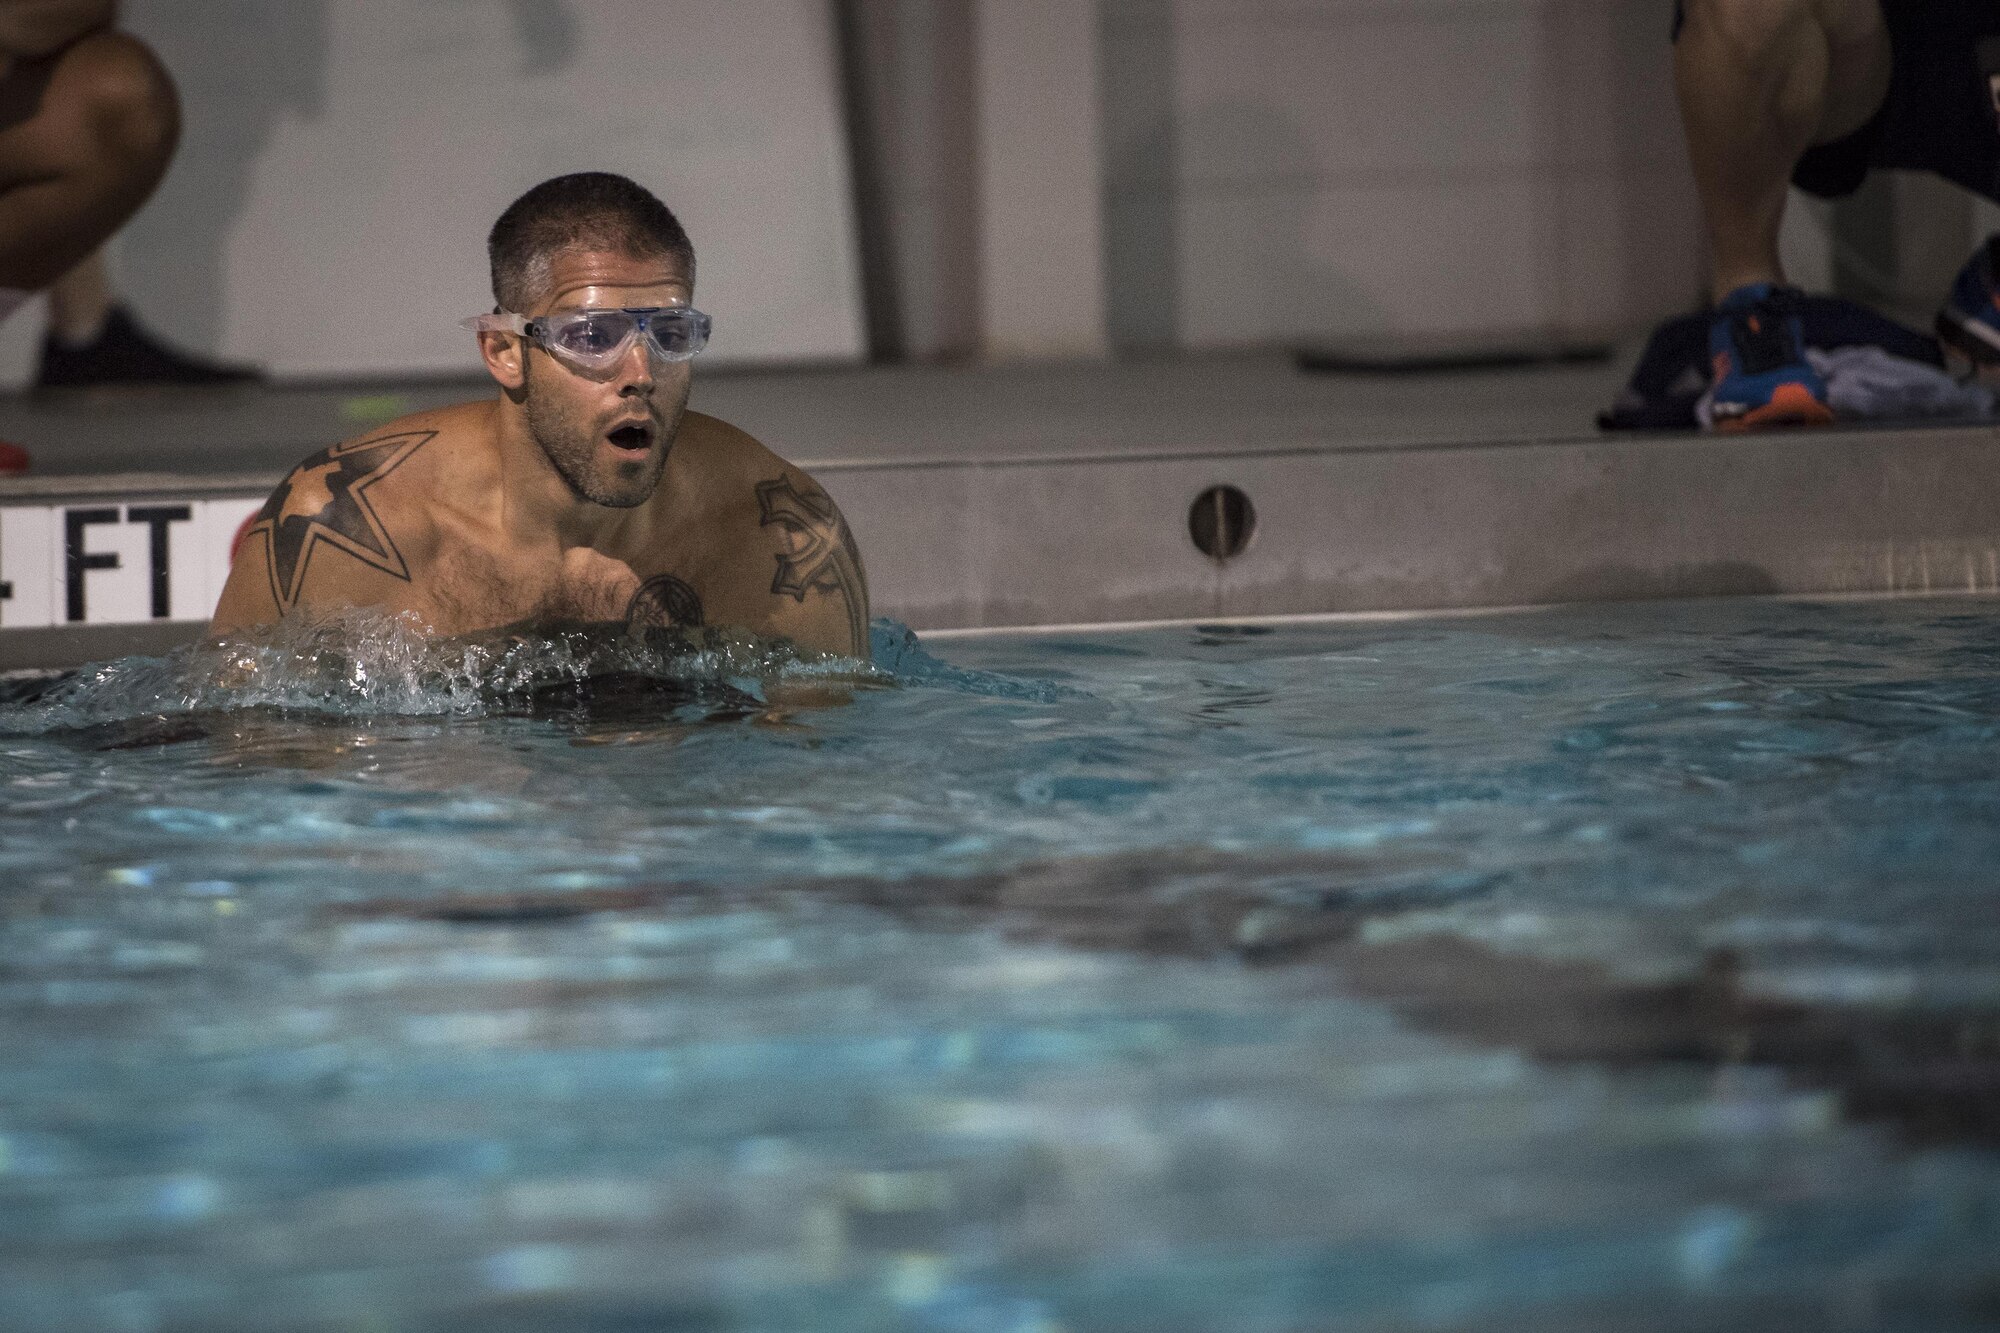 A competitor starts the swim portion of the Police Week Quadathalon, May 15, 2017, at Moody Air Force Base, Ga. Teams of four participated in a swim, run, bike and ruck march competition, where the team with the fastest time won bragging rights. Overall, Police Week is designed to honor the legacies fallen officers, both civilian and military, have left behind, but it also gives various sections within the law enforcement community an opportunity to train together in friendly competitions. (U.S. Air Force photo by Senior Airman Janiqua P. Robinson)